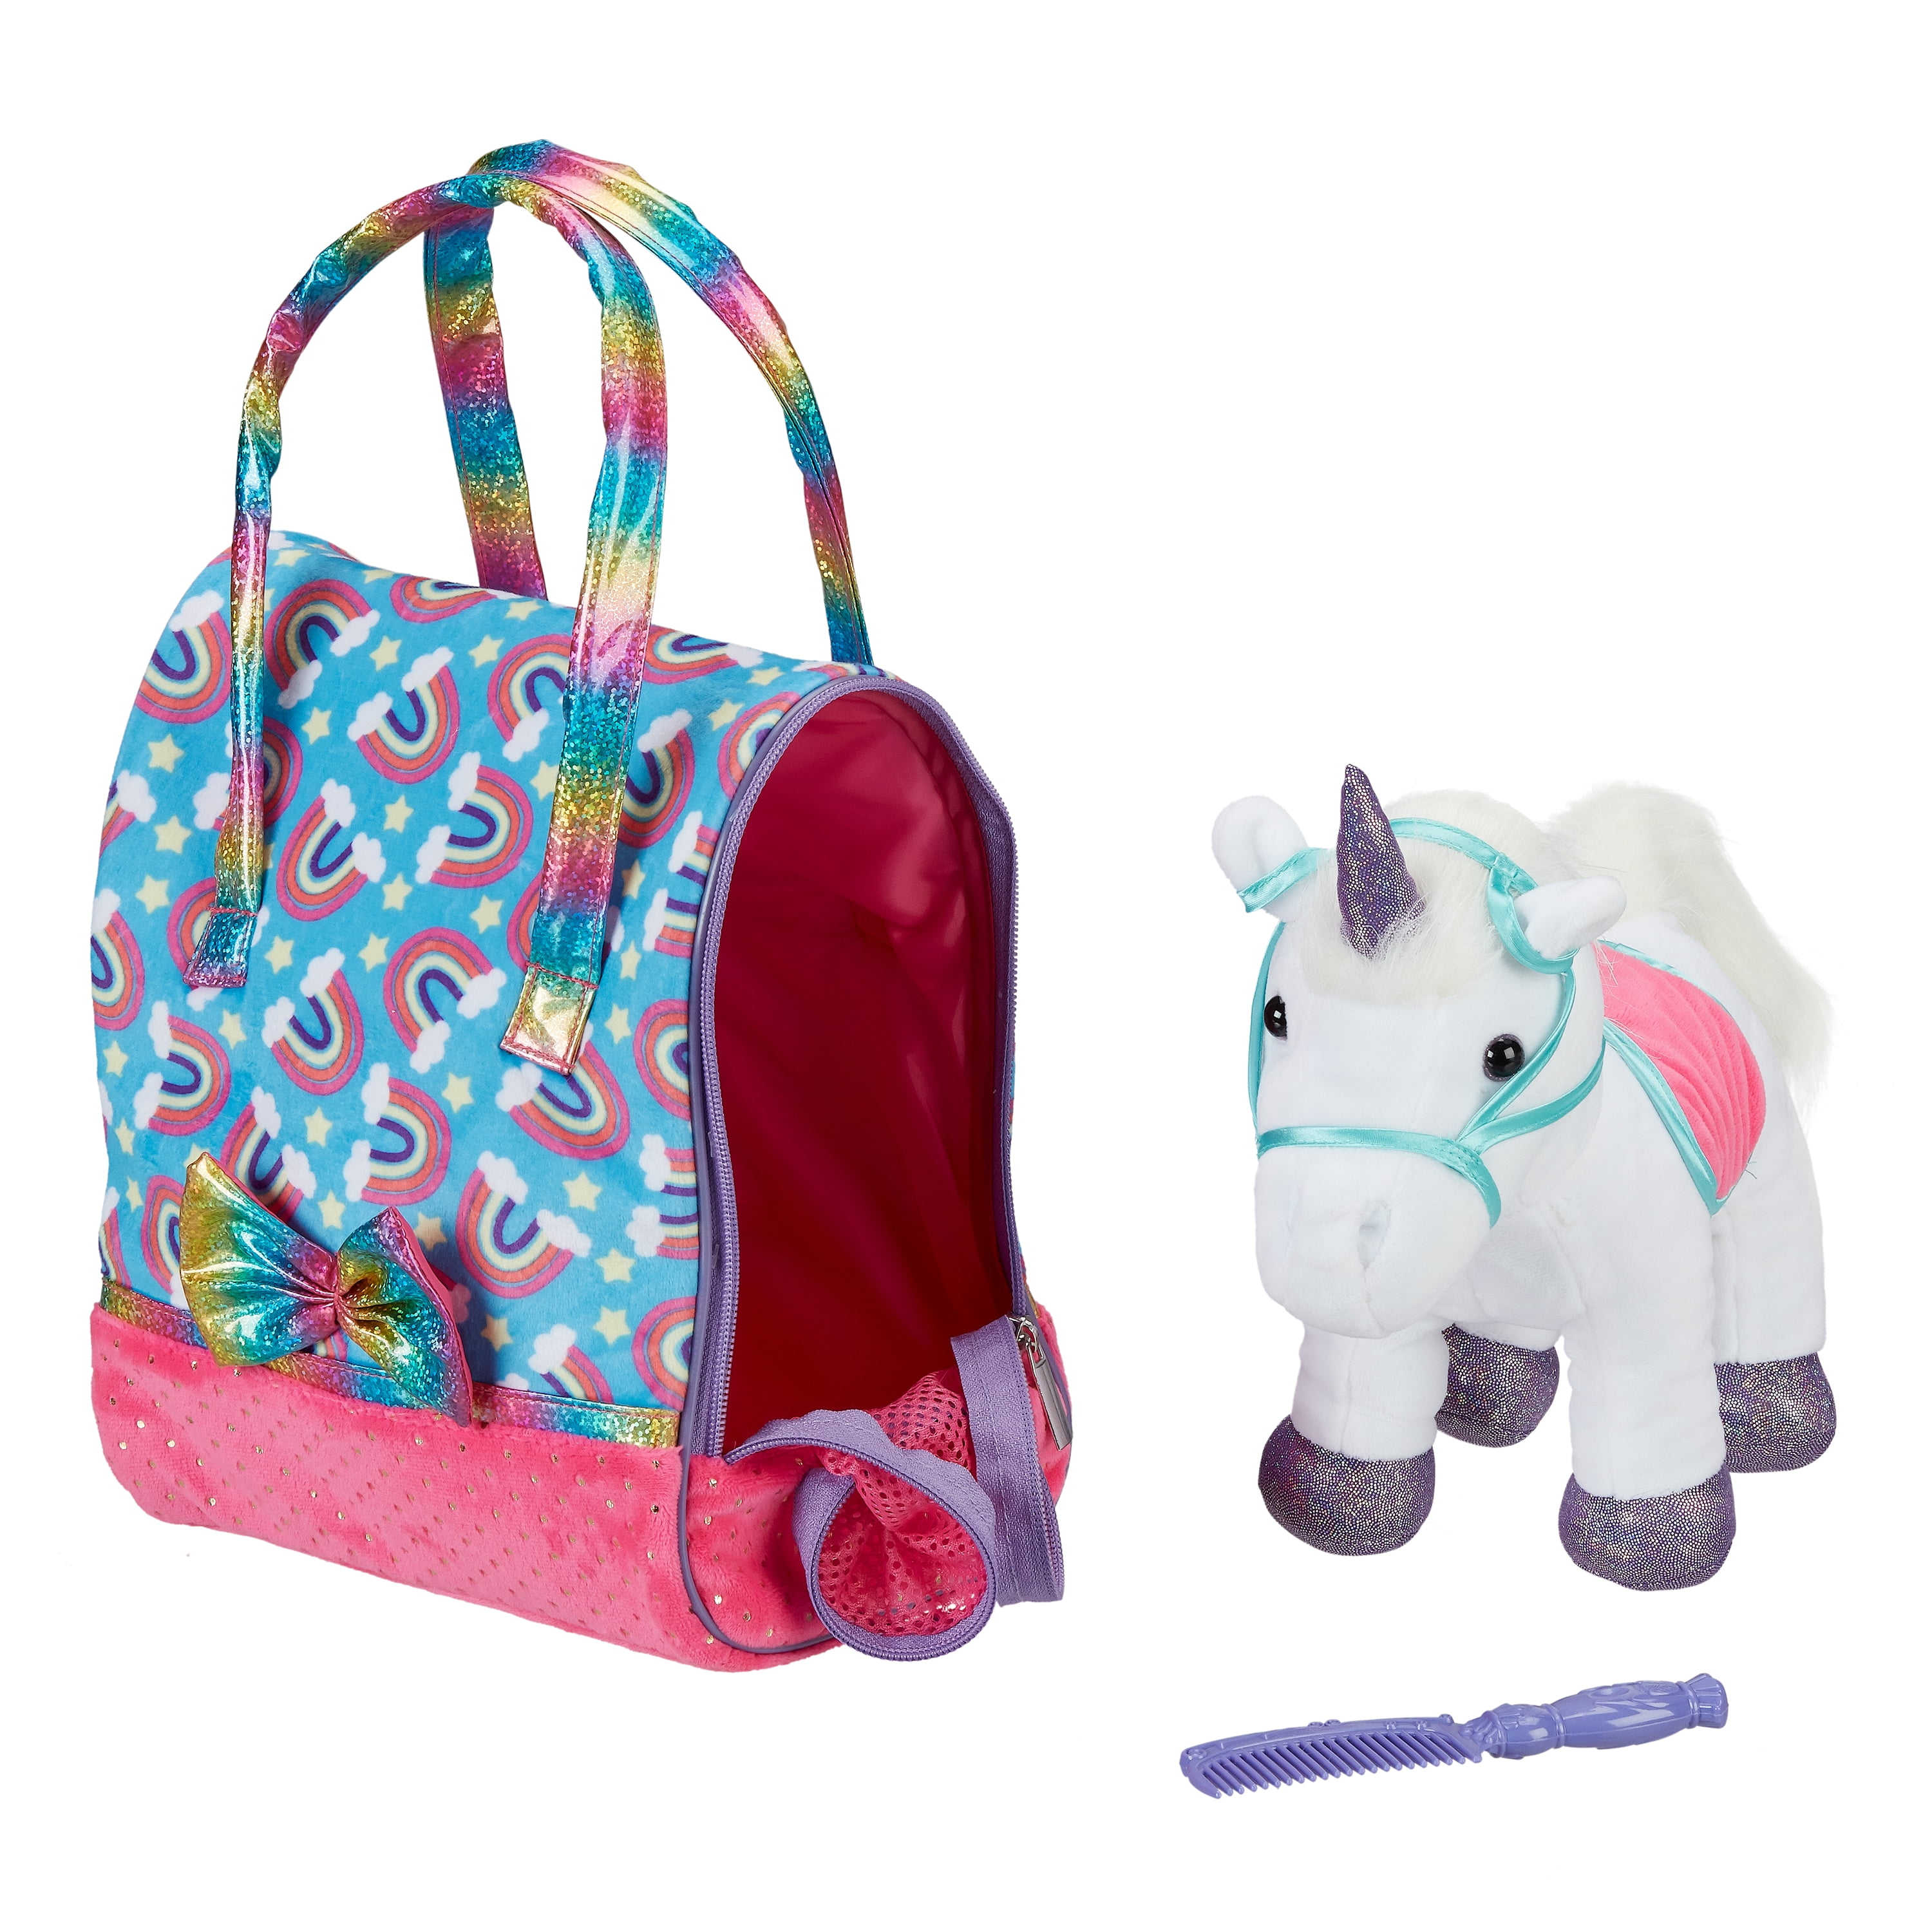 Lucky Bag LITTLE PONY HORSE PENCILS SET OF 8 Party Bag Children Rainbow,Crafts 